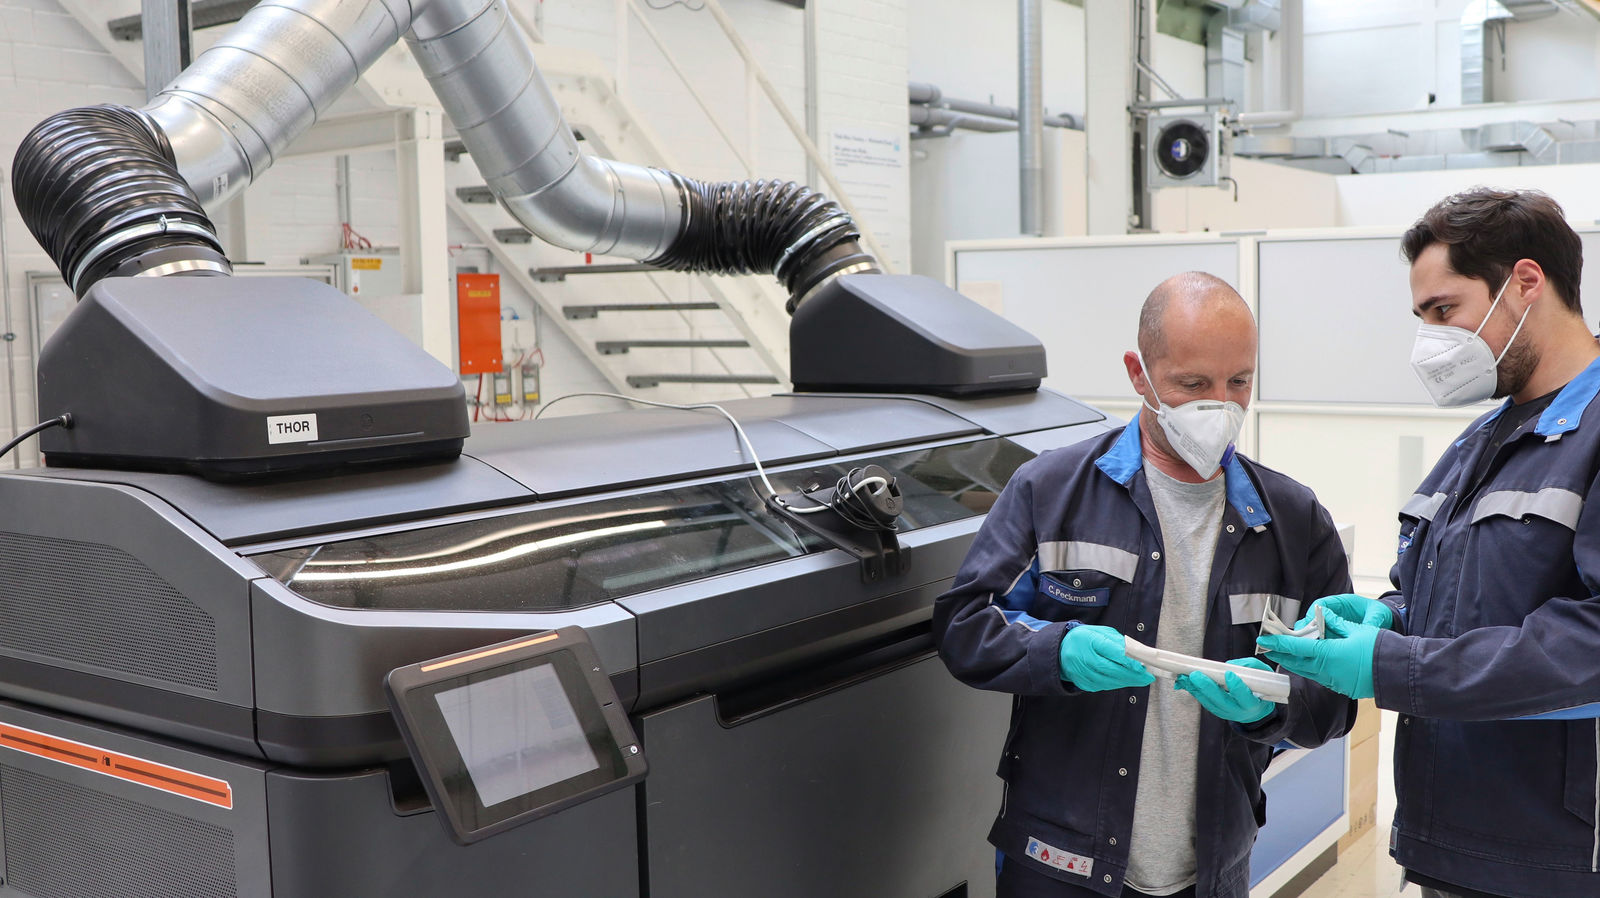 Volkswagen plans to use new 3D printing process in vehicle production in the years ahead